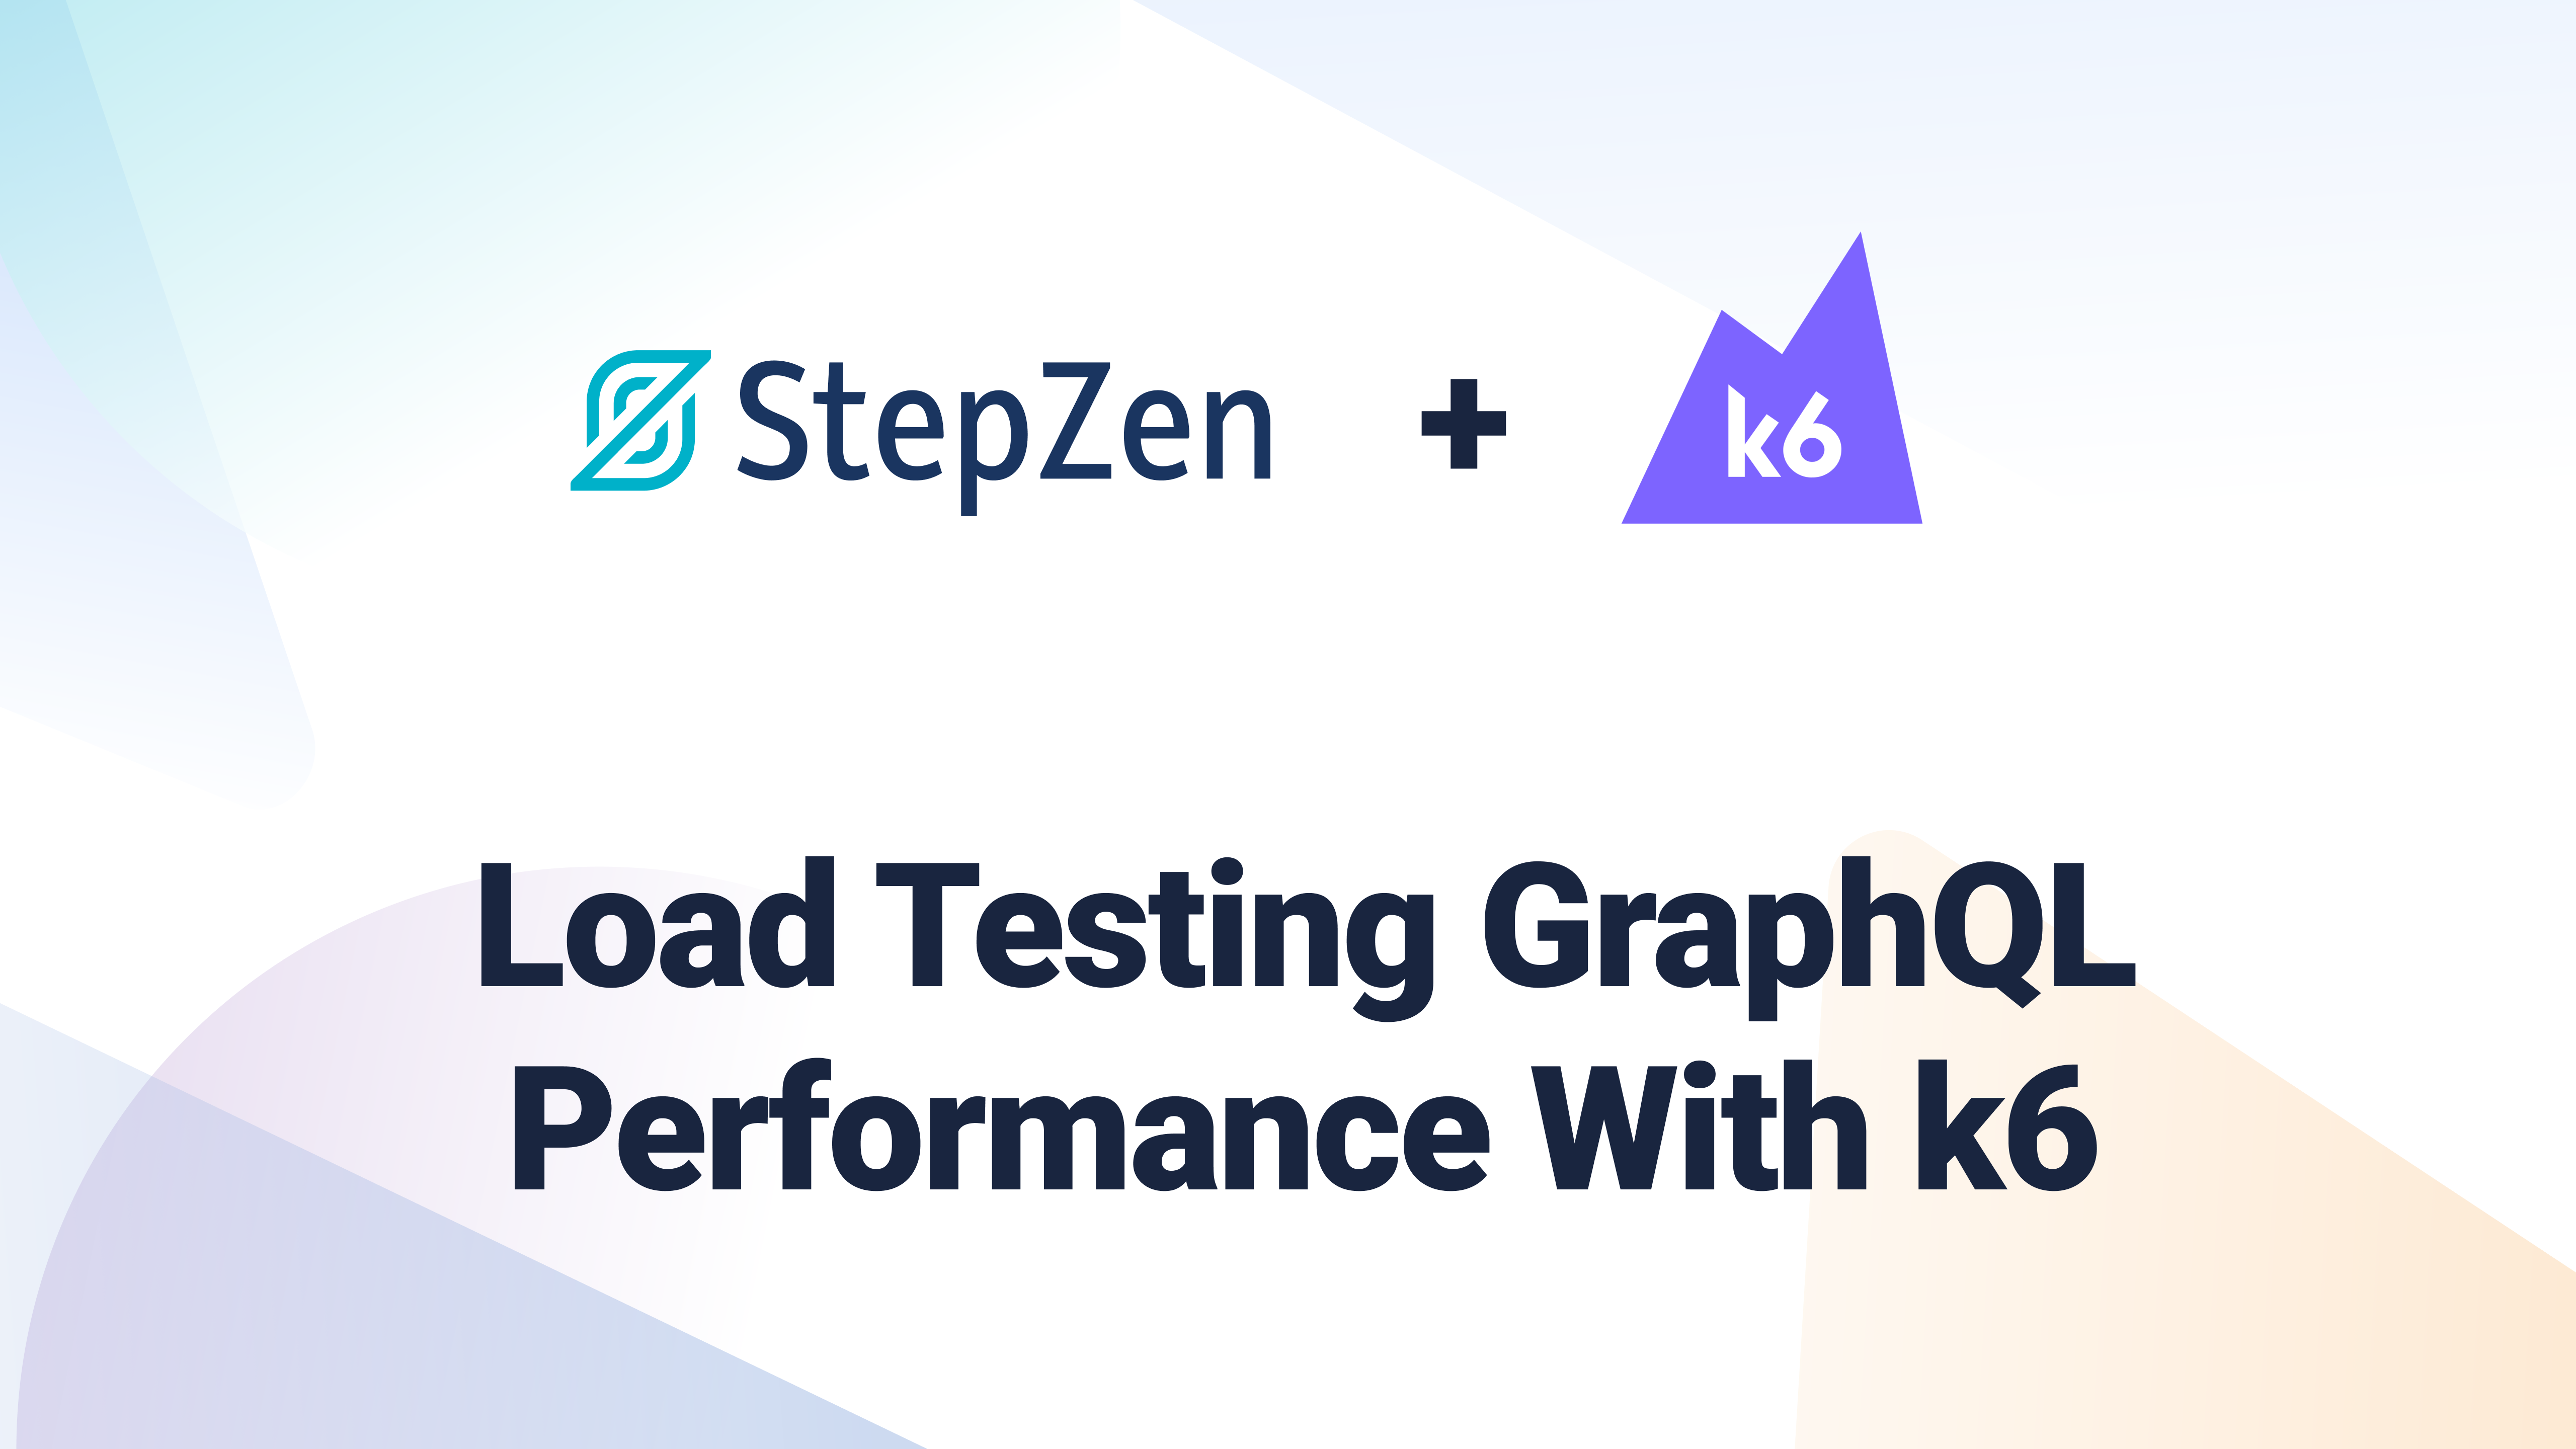 Load Testing GraphQL Performance With k6 and StepZen